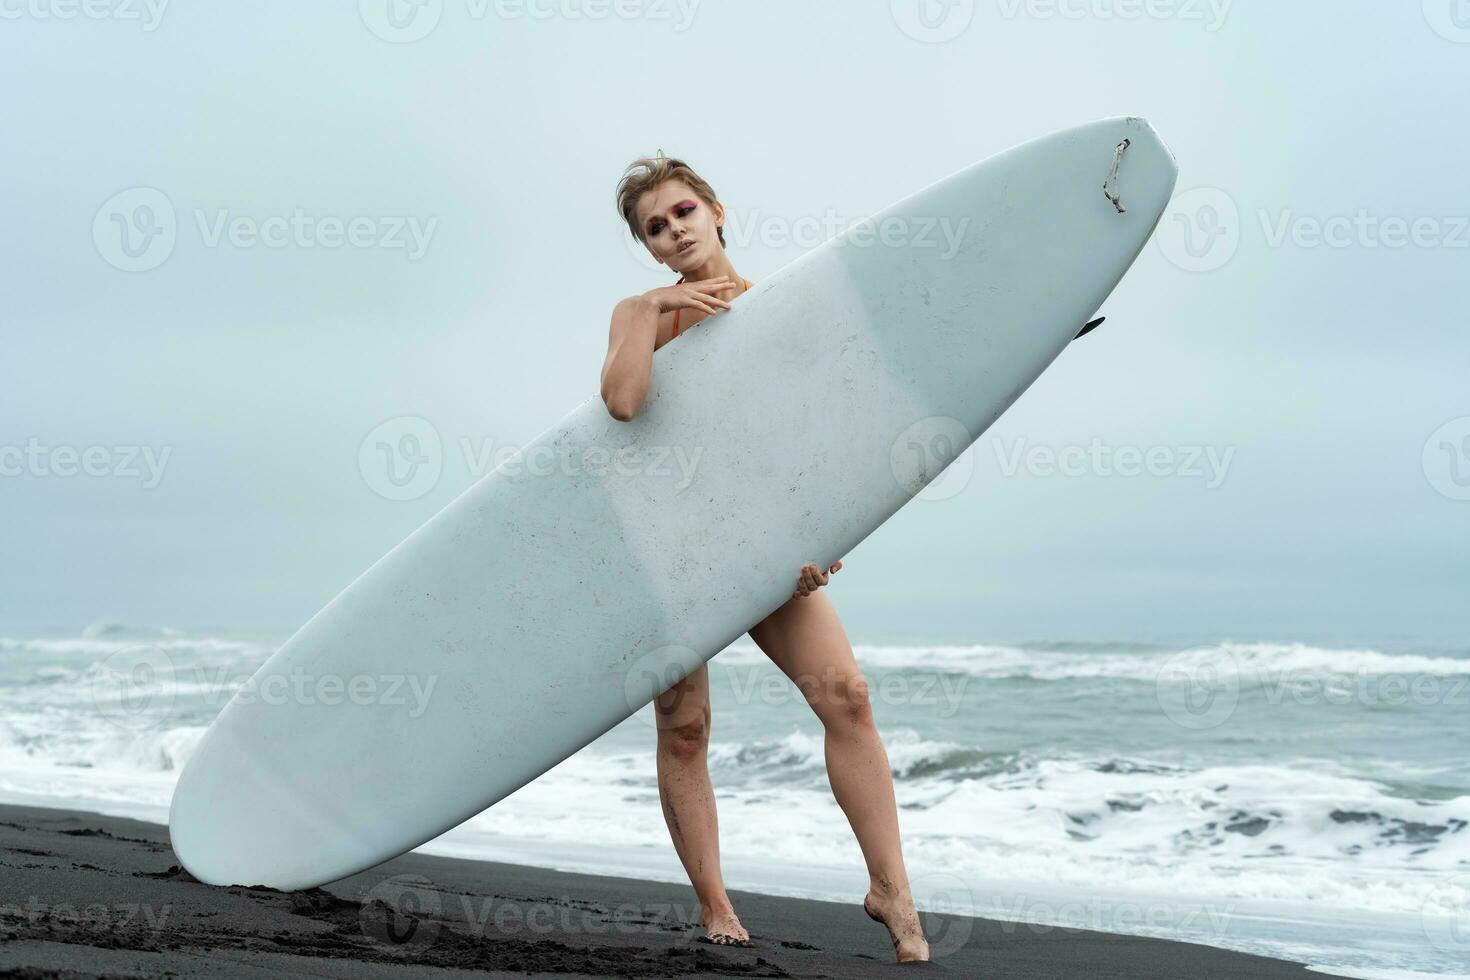 Woman surfer on beach holding surfboard and standing behind it and looking at camera photo